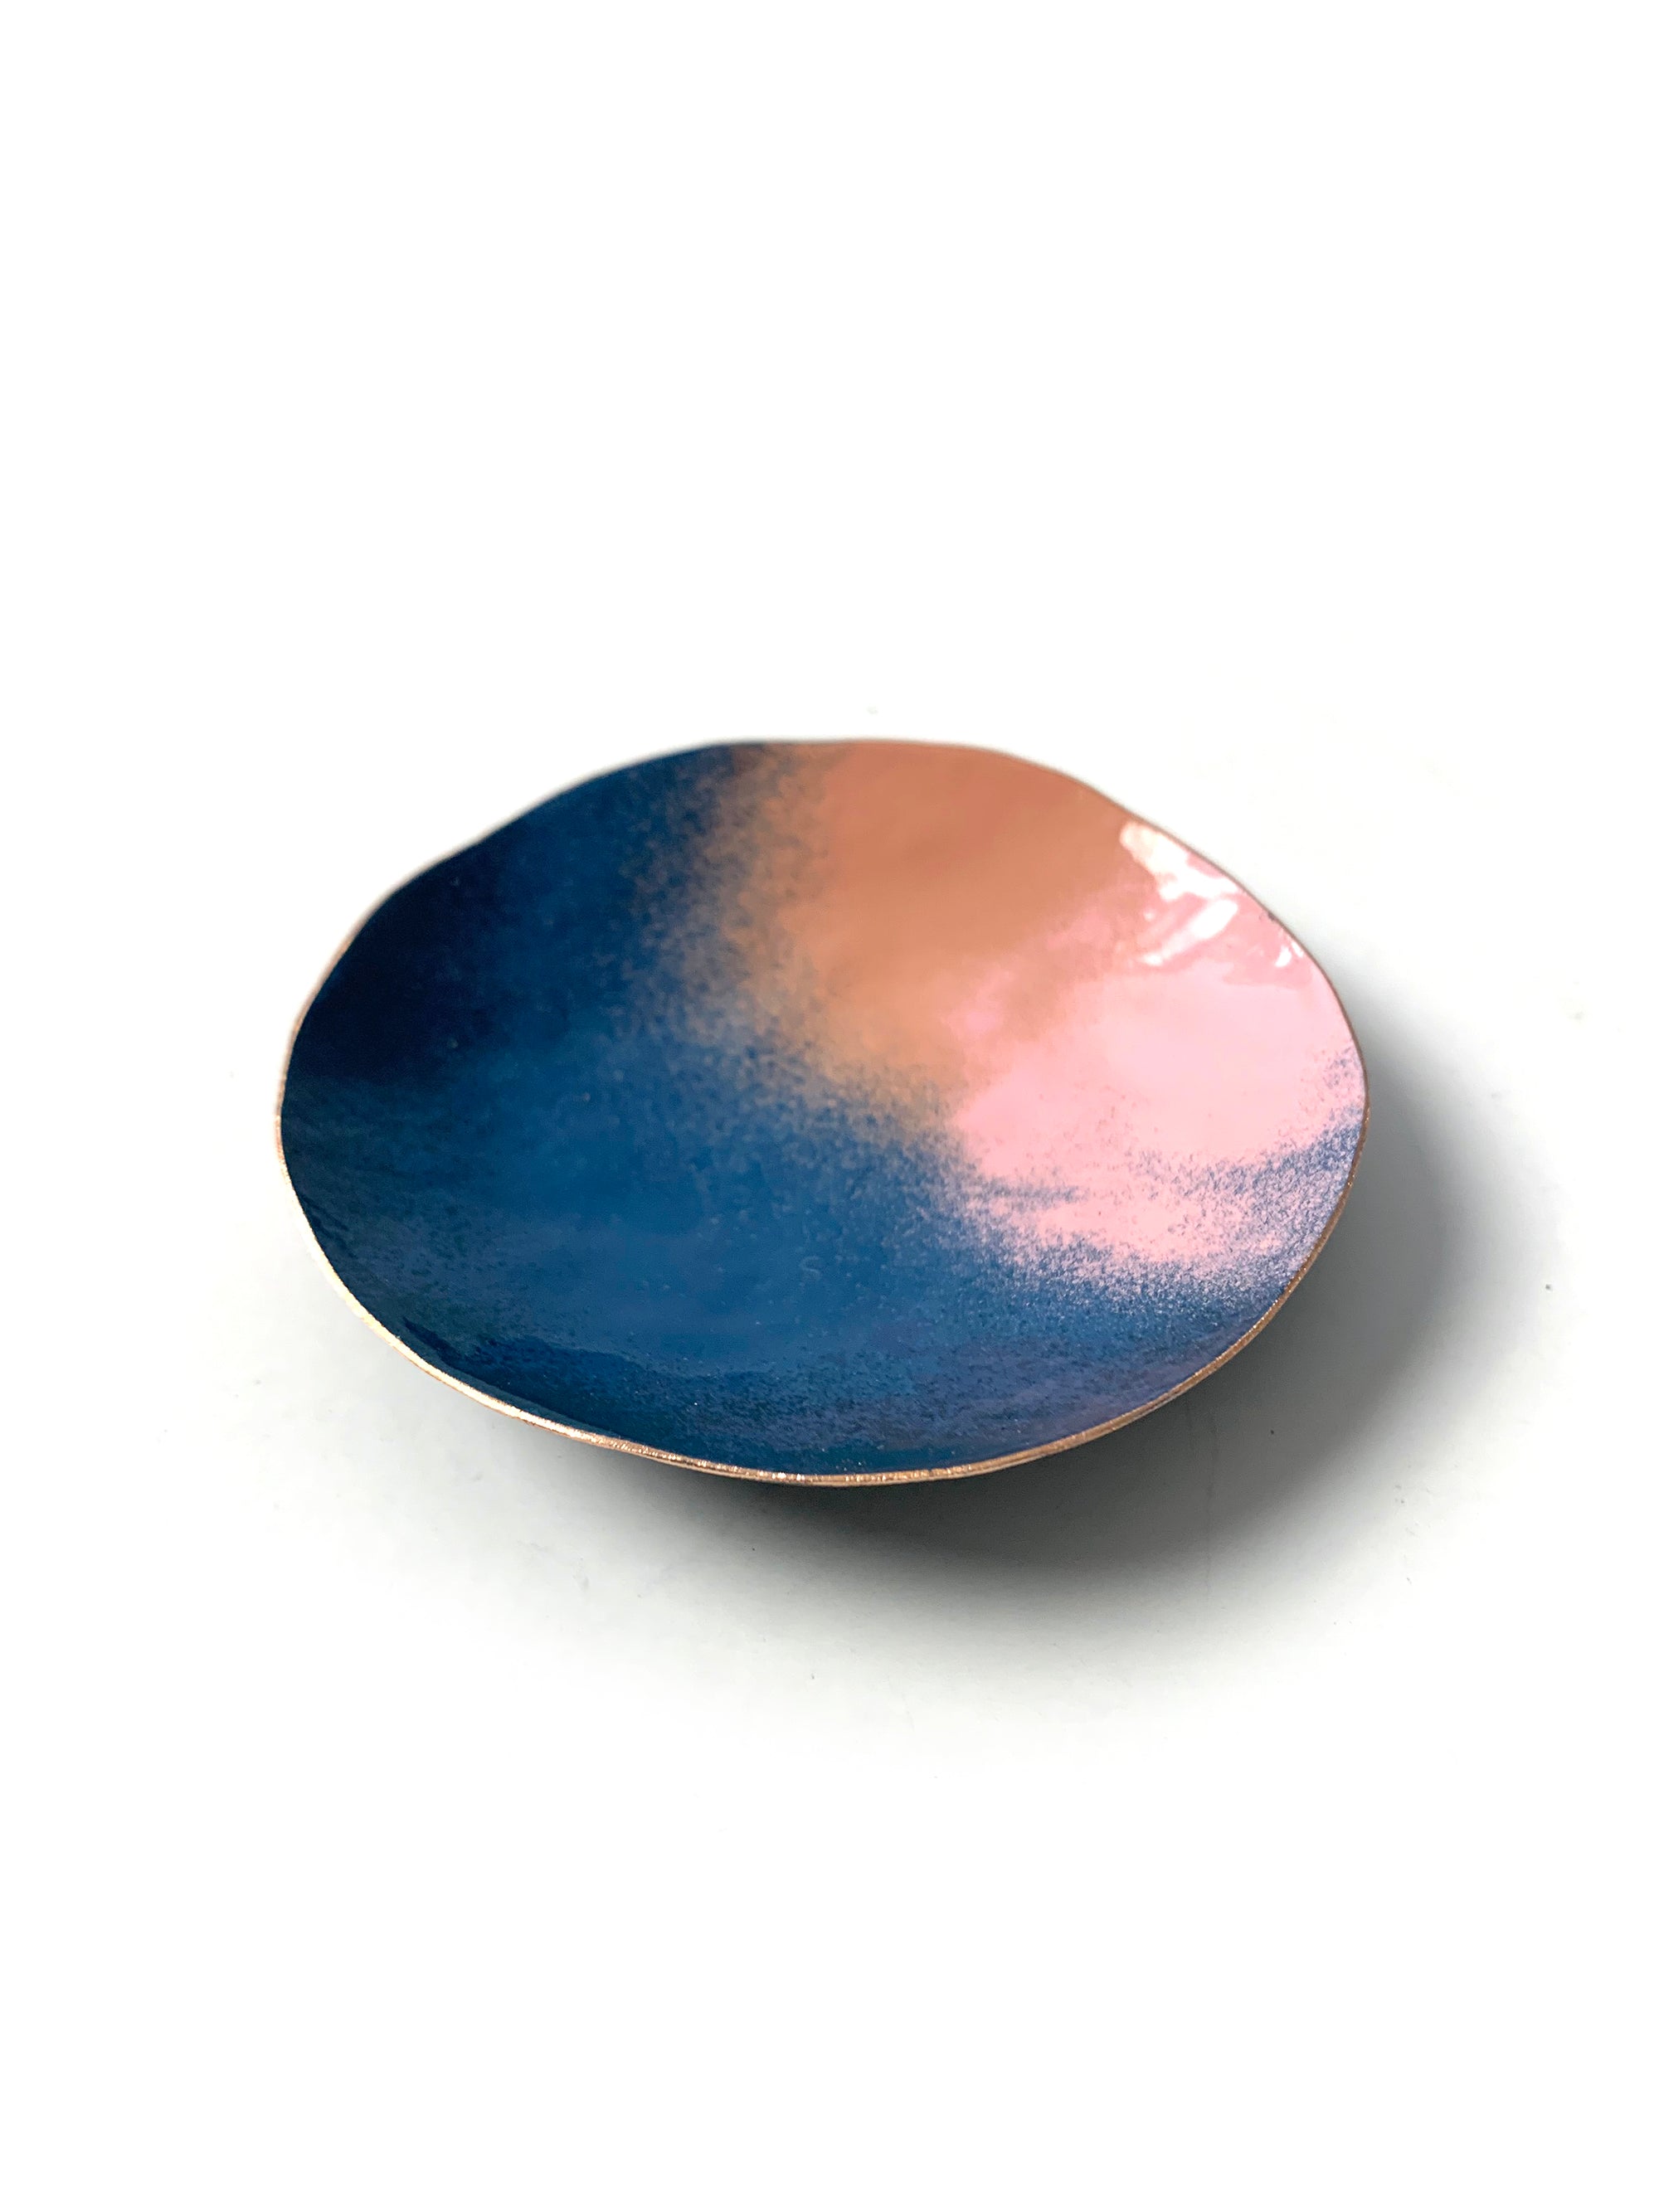 Little Copper Dish in Azure Blue and Dusty Rose